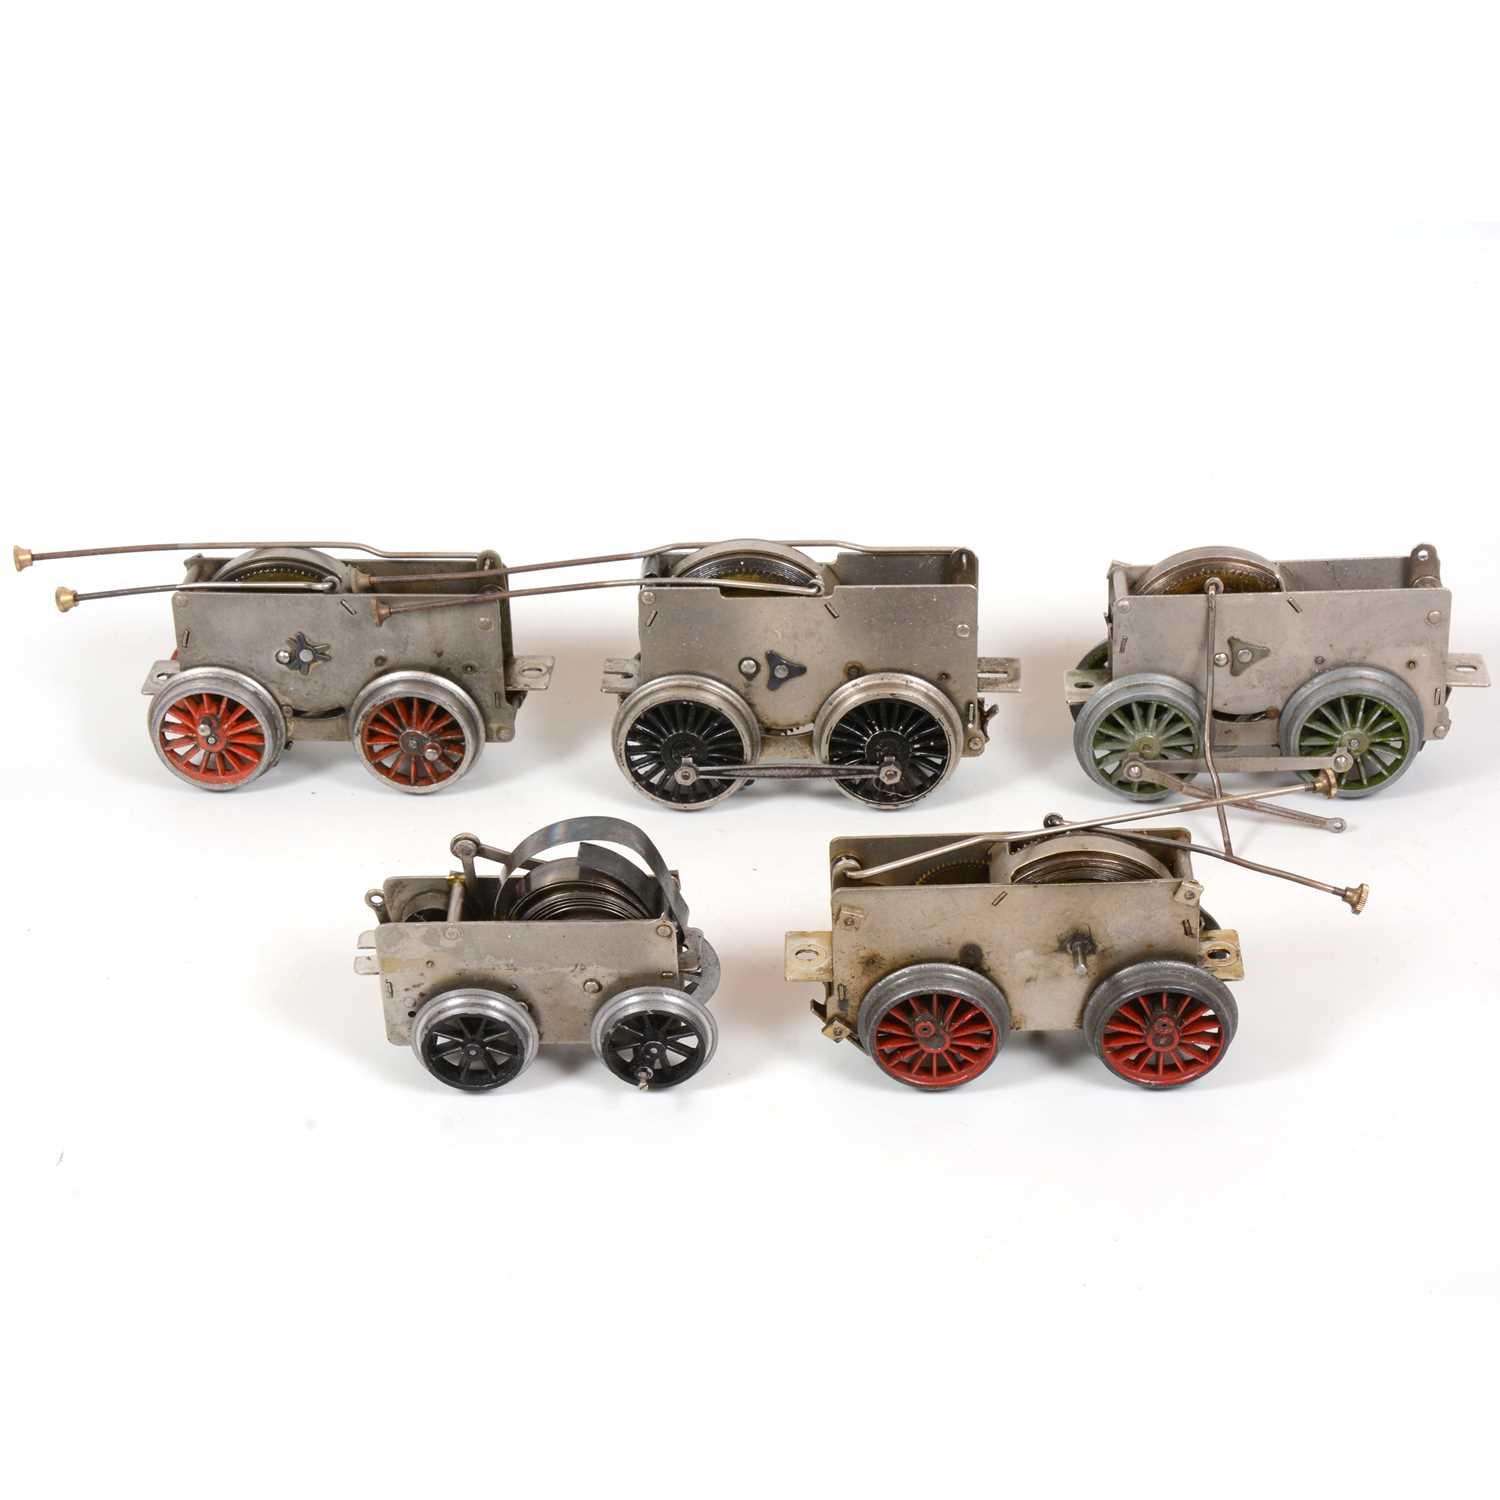 Lot 12 - Six Hornby O gauge model railway clock-work motor chassis for locomotives, all loose.